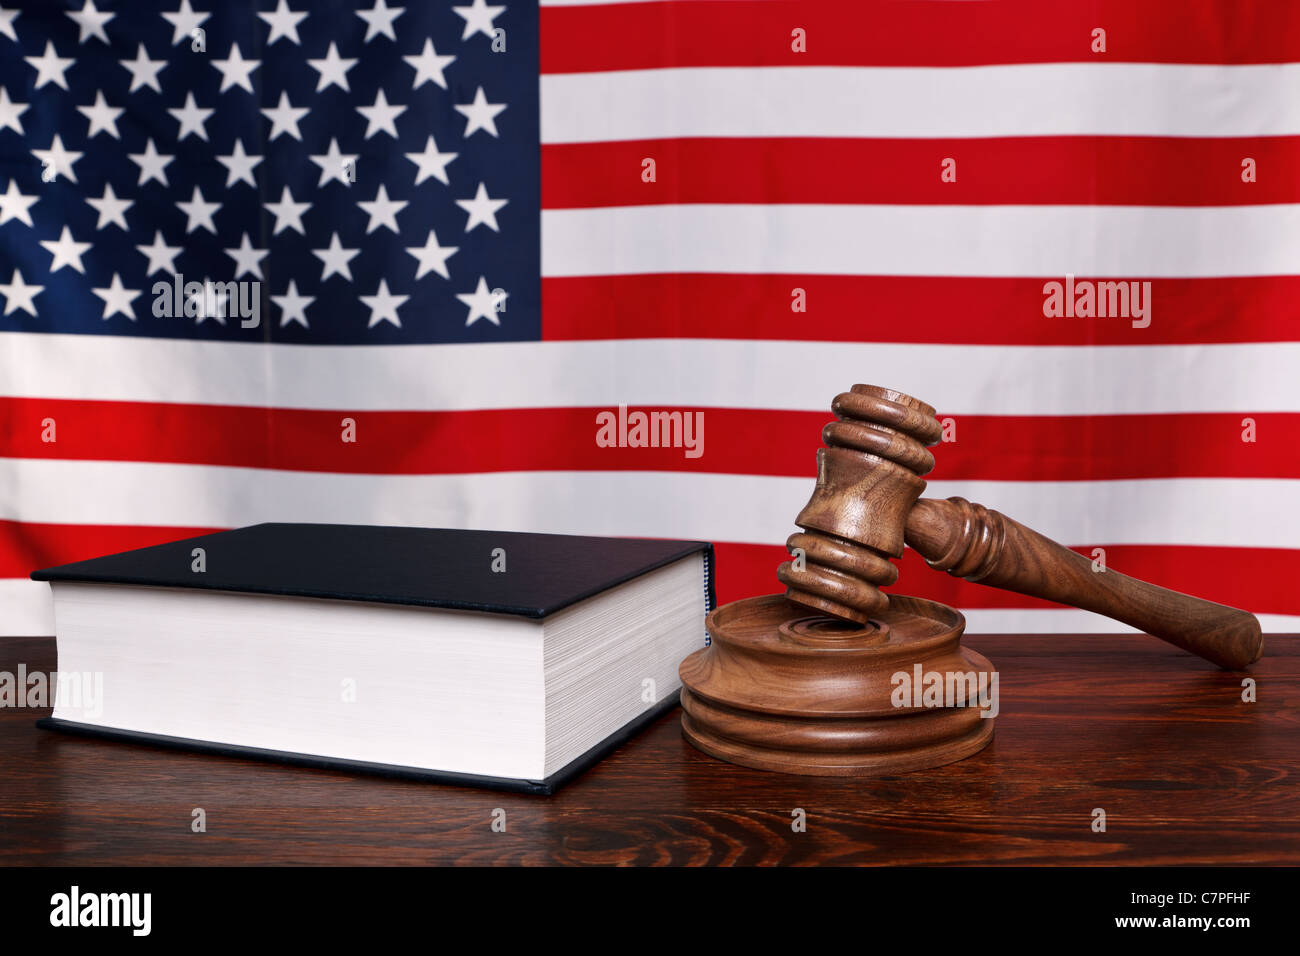 Still life photo of a gavel, block and law book on a judges bench with the American flag behind. Stock Photo